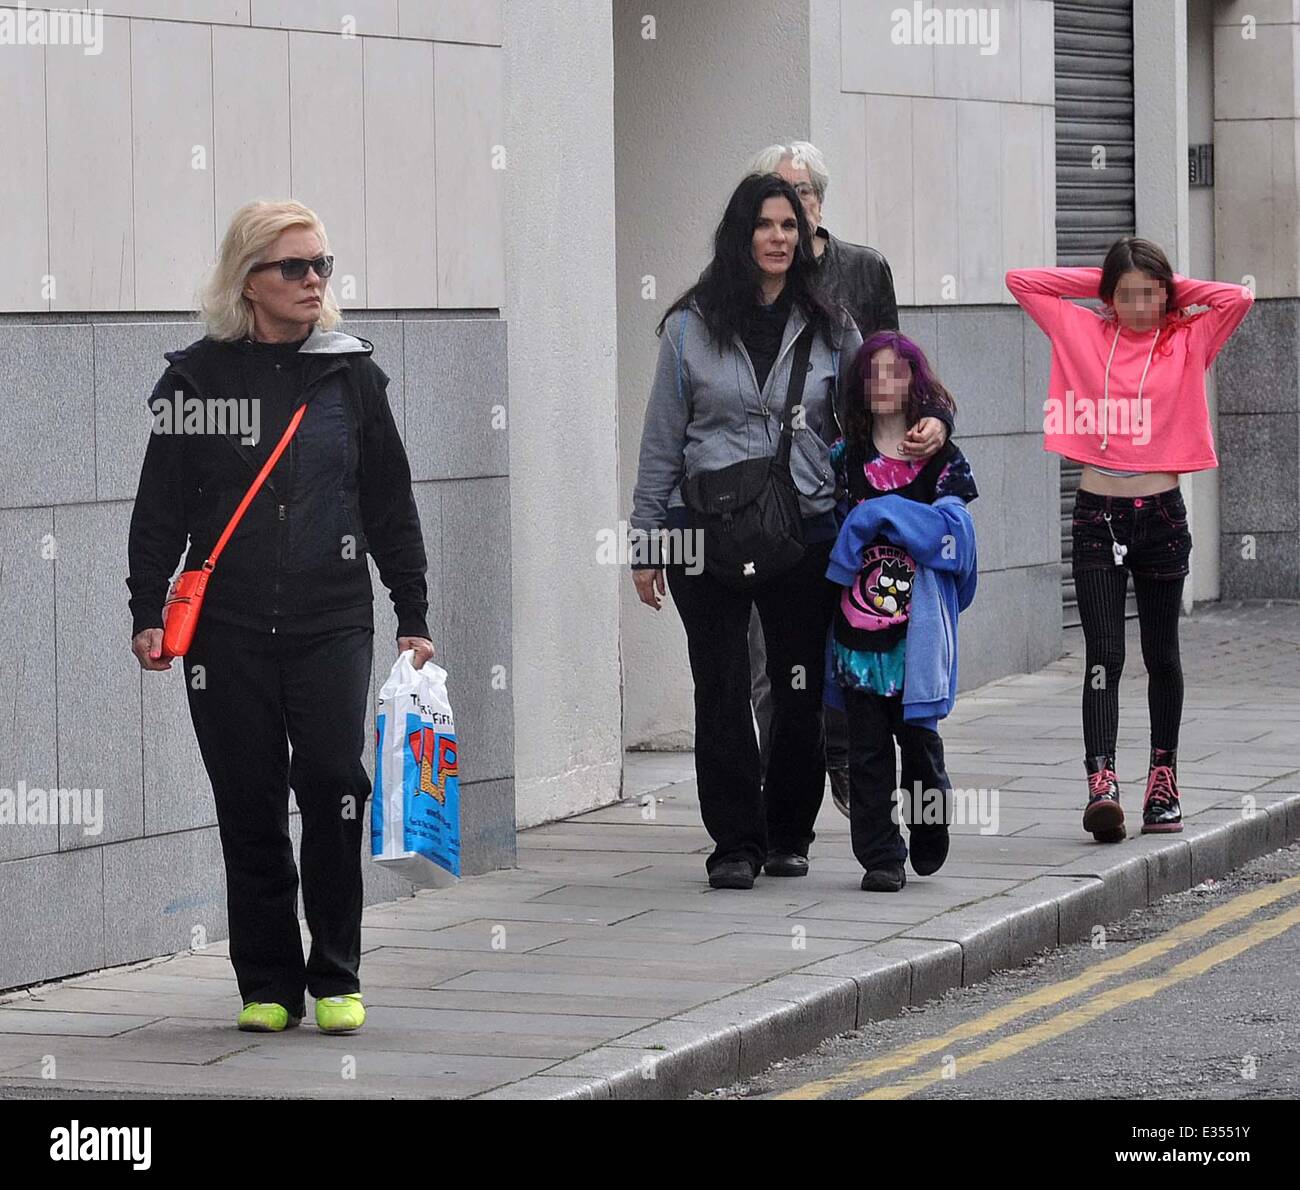 Deborah Harry aka Blondie spotted shopping in Temple Bar at vintage clothes store 'Flip' and browsing the shops with her former partner Chris Stein and his current partner Barbara Sicuranza and their children Akira and Valentina. Blondie performs at The O Stock Photo